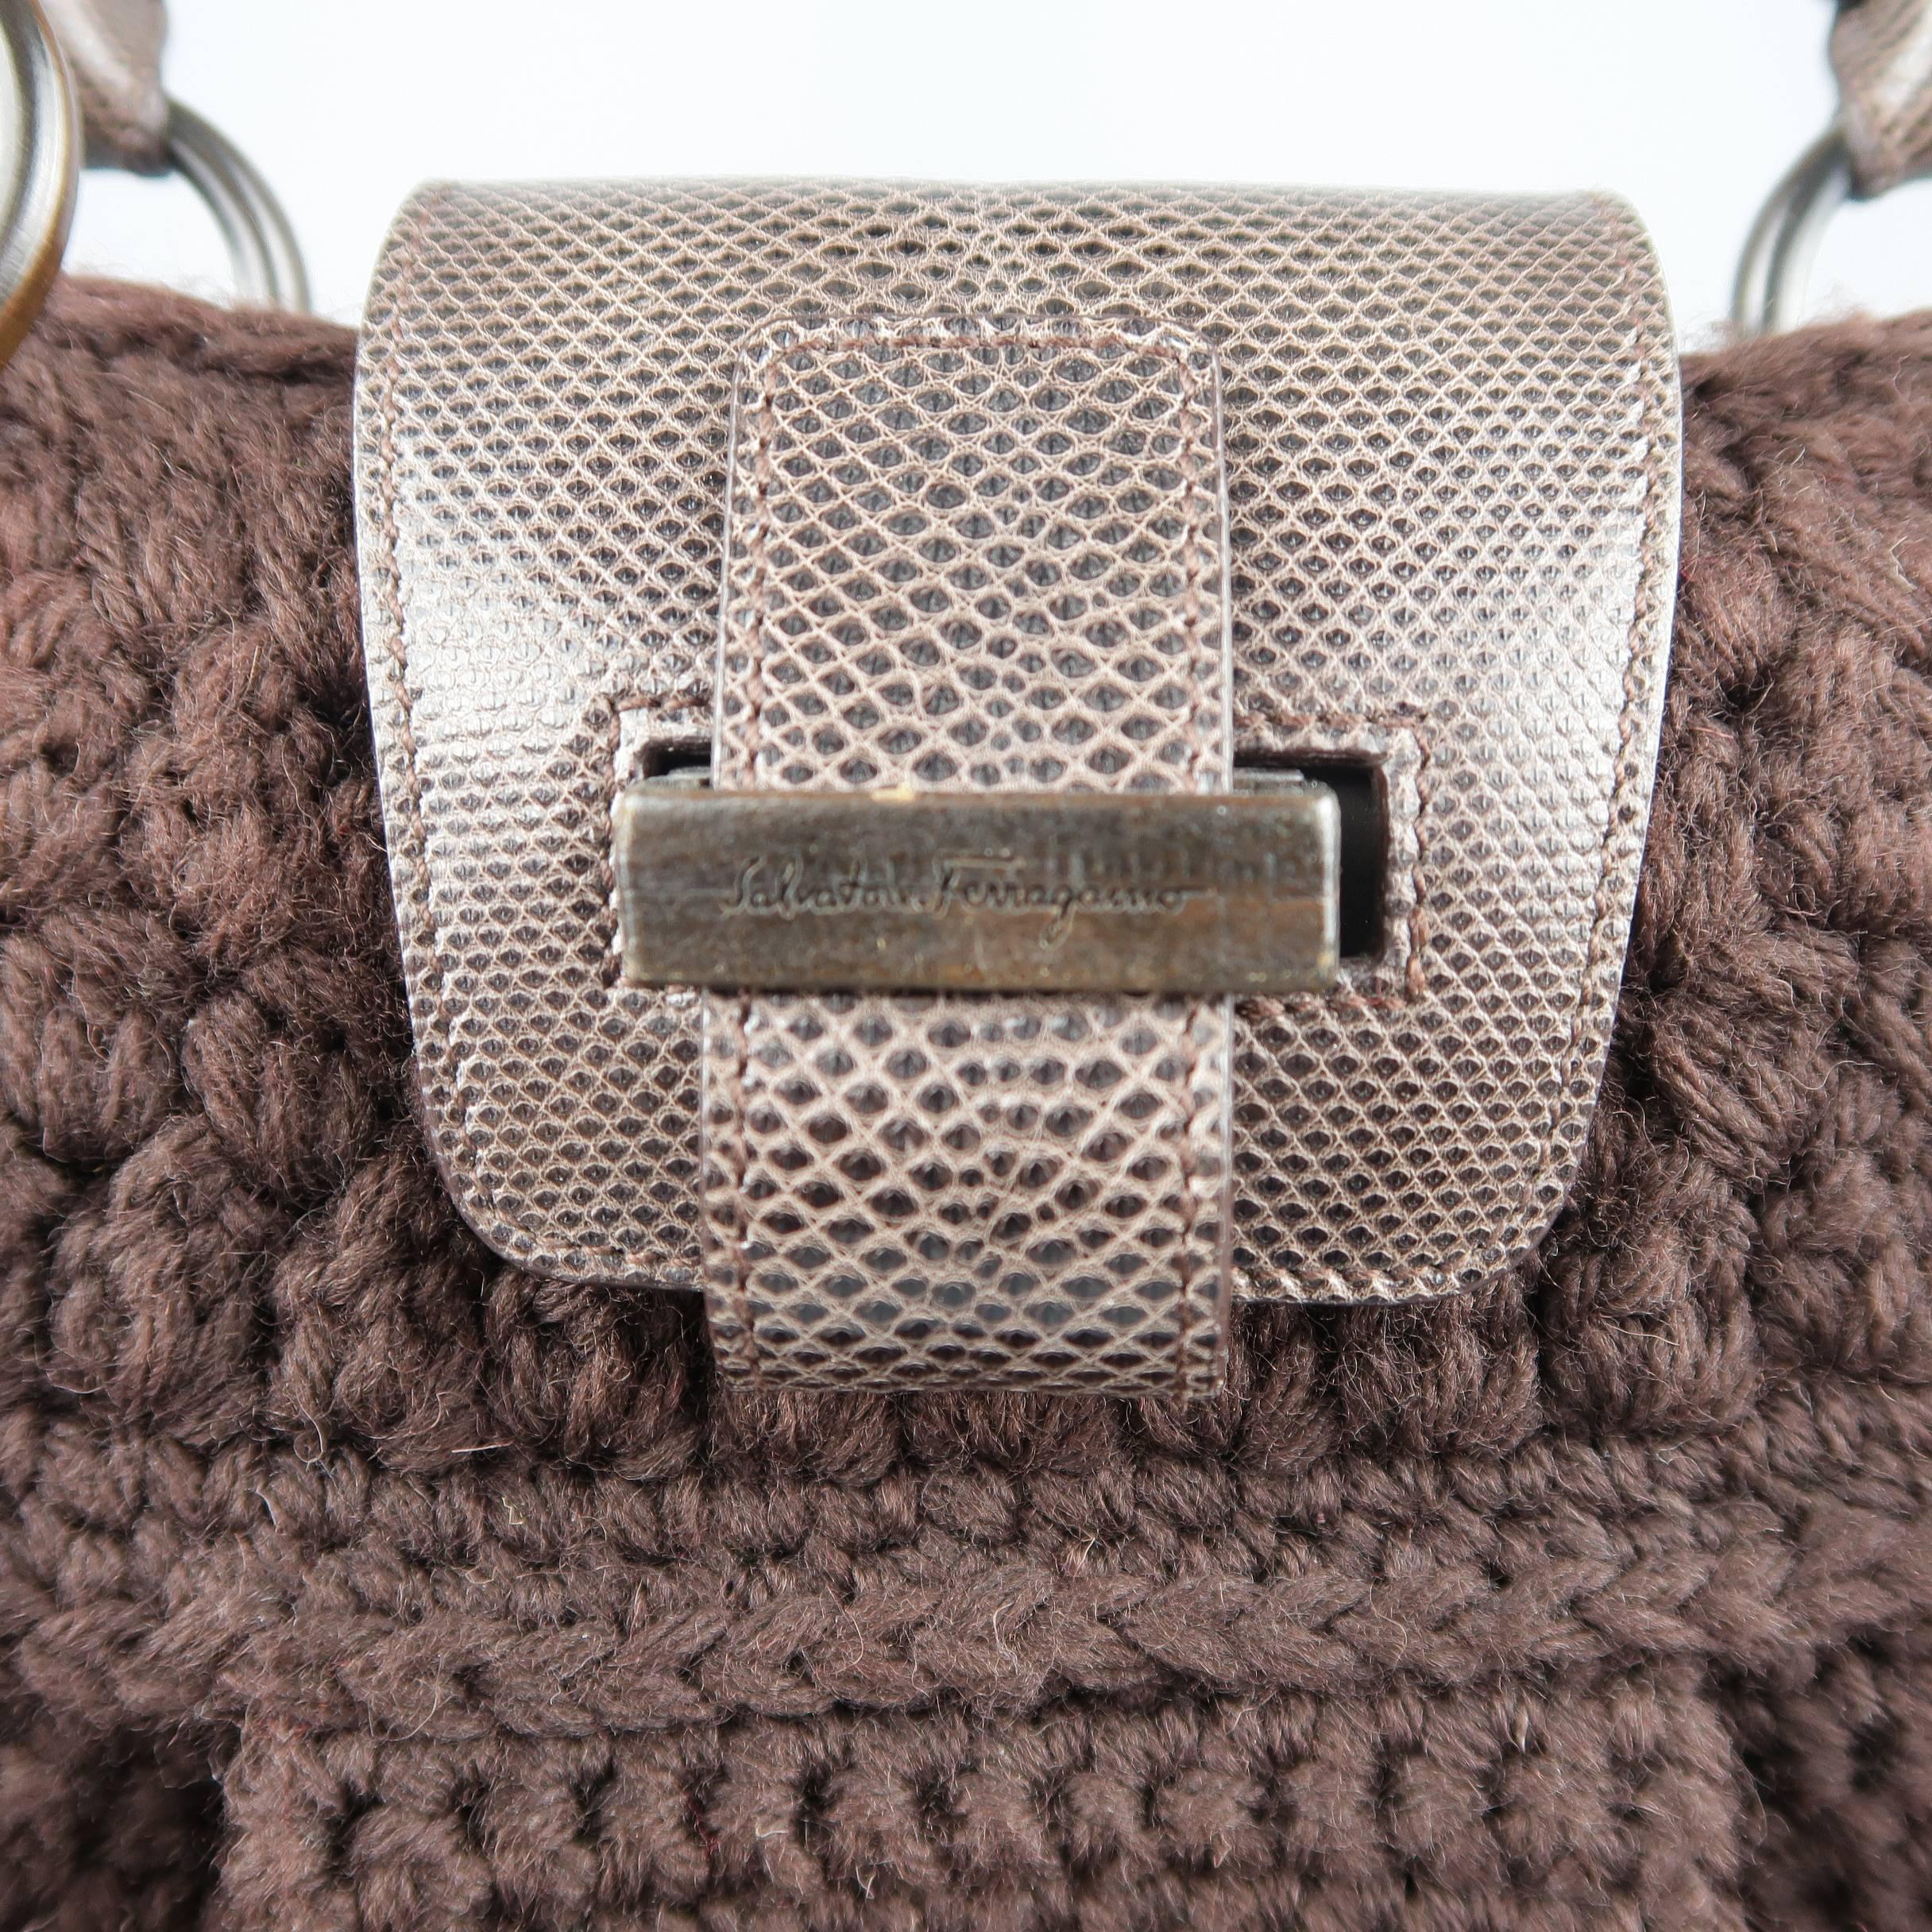 SALVATORE FERRAGAMO shoulder bag comes in a rich brown crochet knit with lizard textured leather details and features a pleated front, Gancini hardware side straps, buckle top closure, and double top handles. Wear on top closure hardware. As-is.